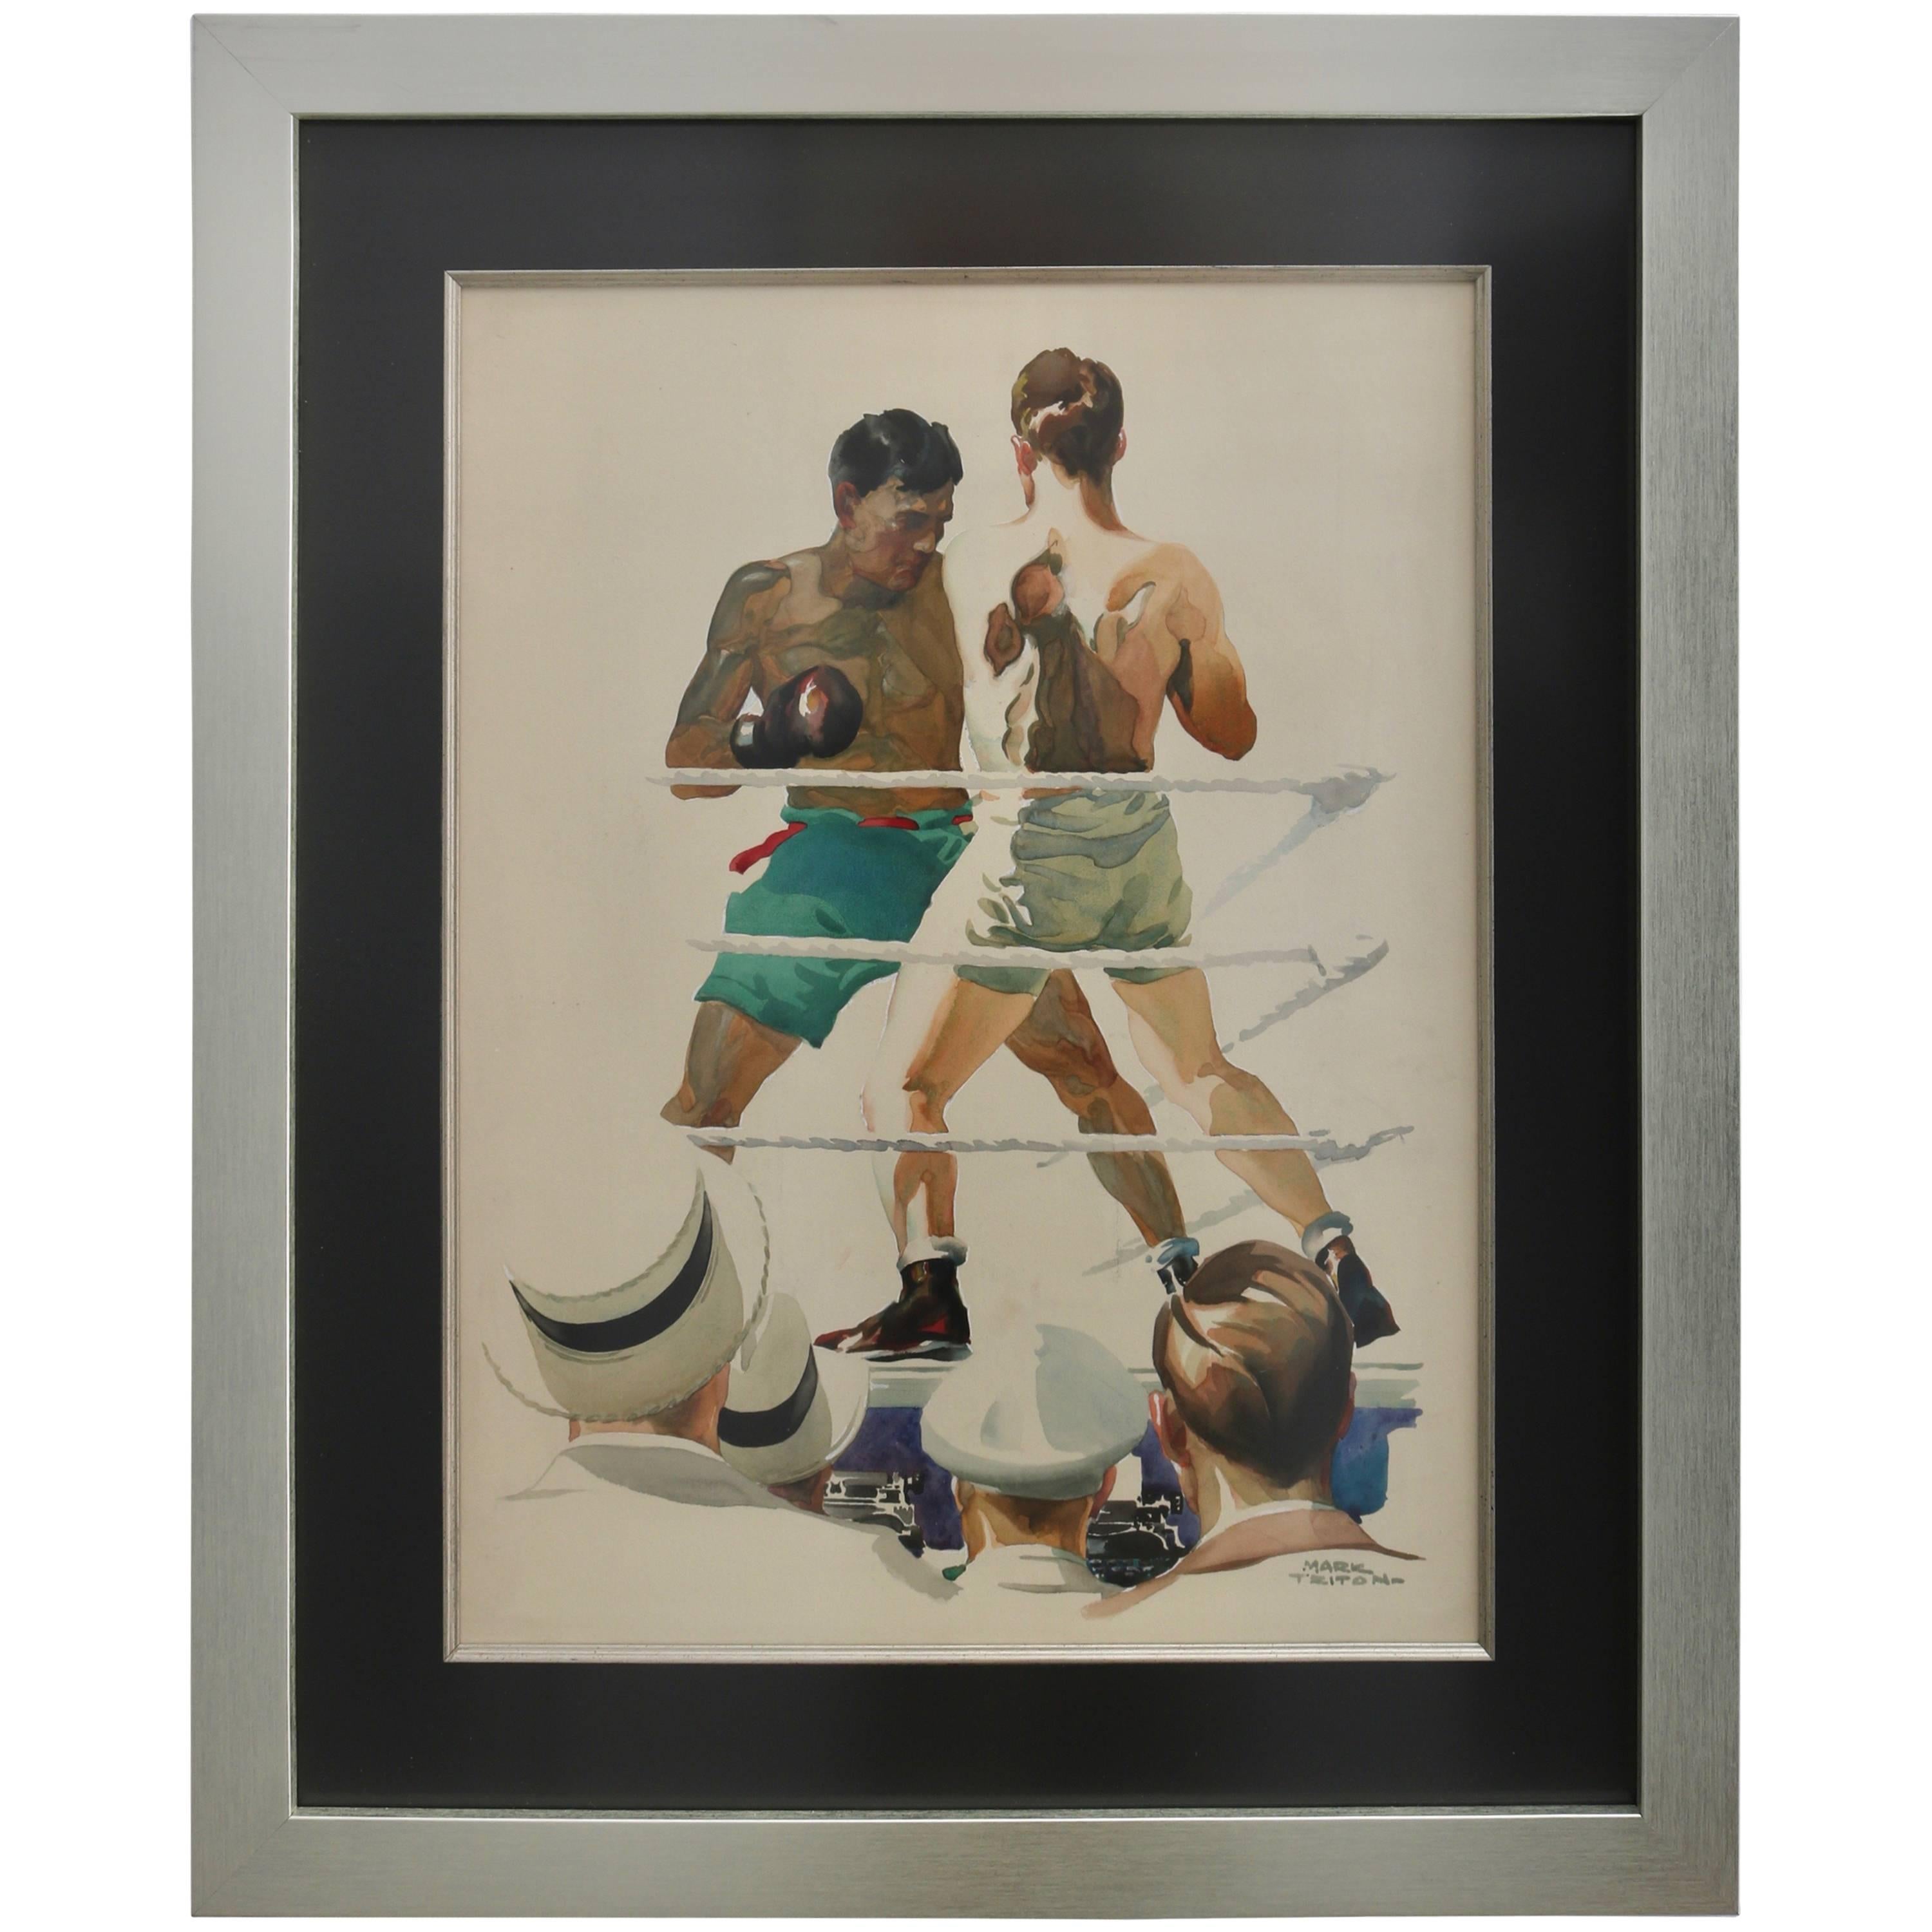  Watercolor of a Boxing Match Titled "Ringside"